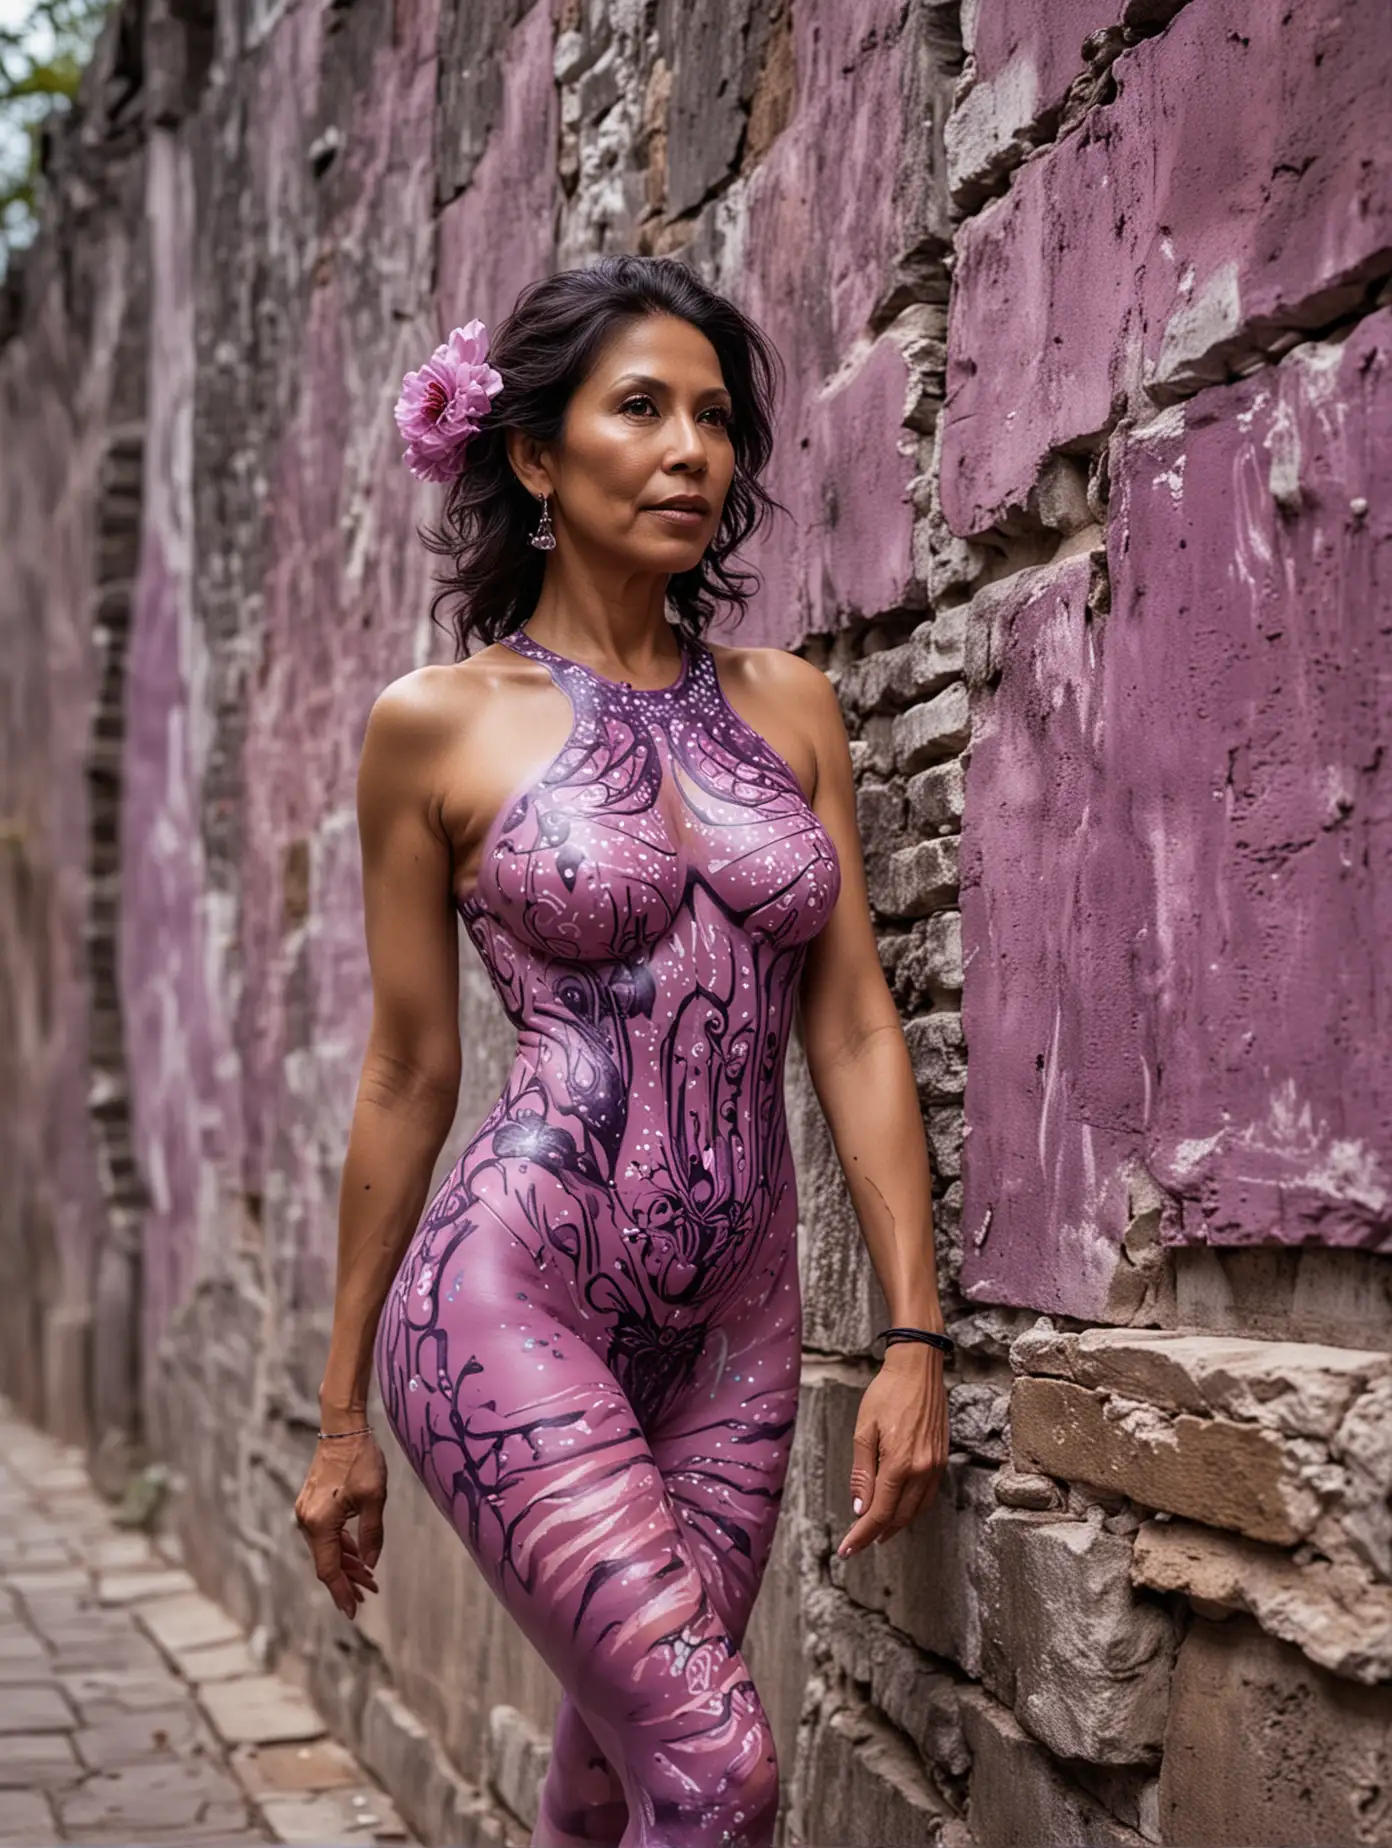 Fifty year old Latina Women body painted in light purple , walking down the Chinese wall. Facing camera